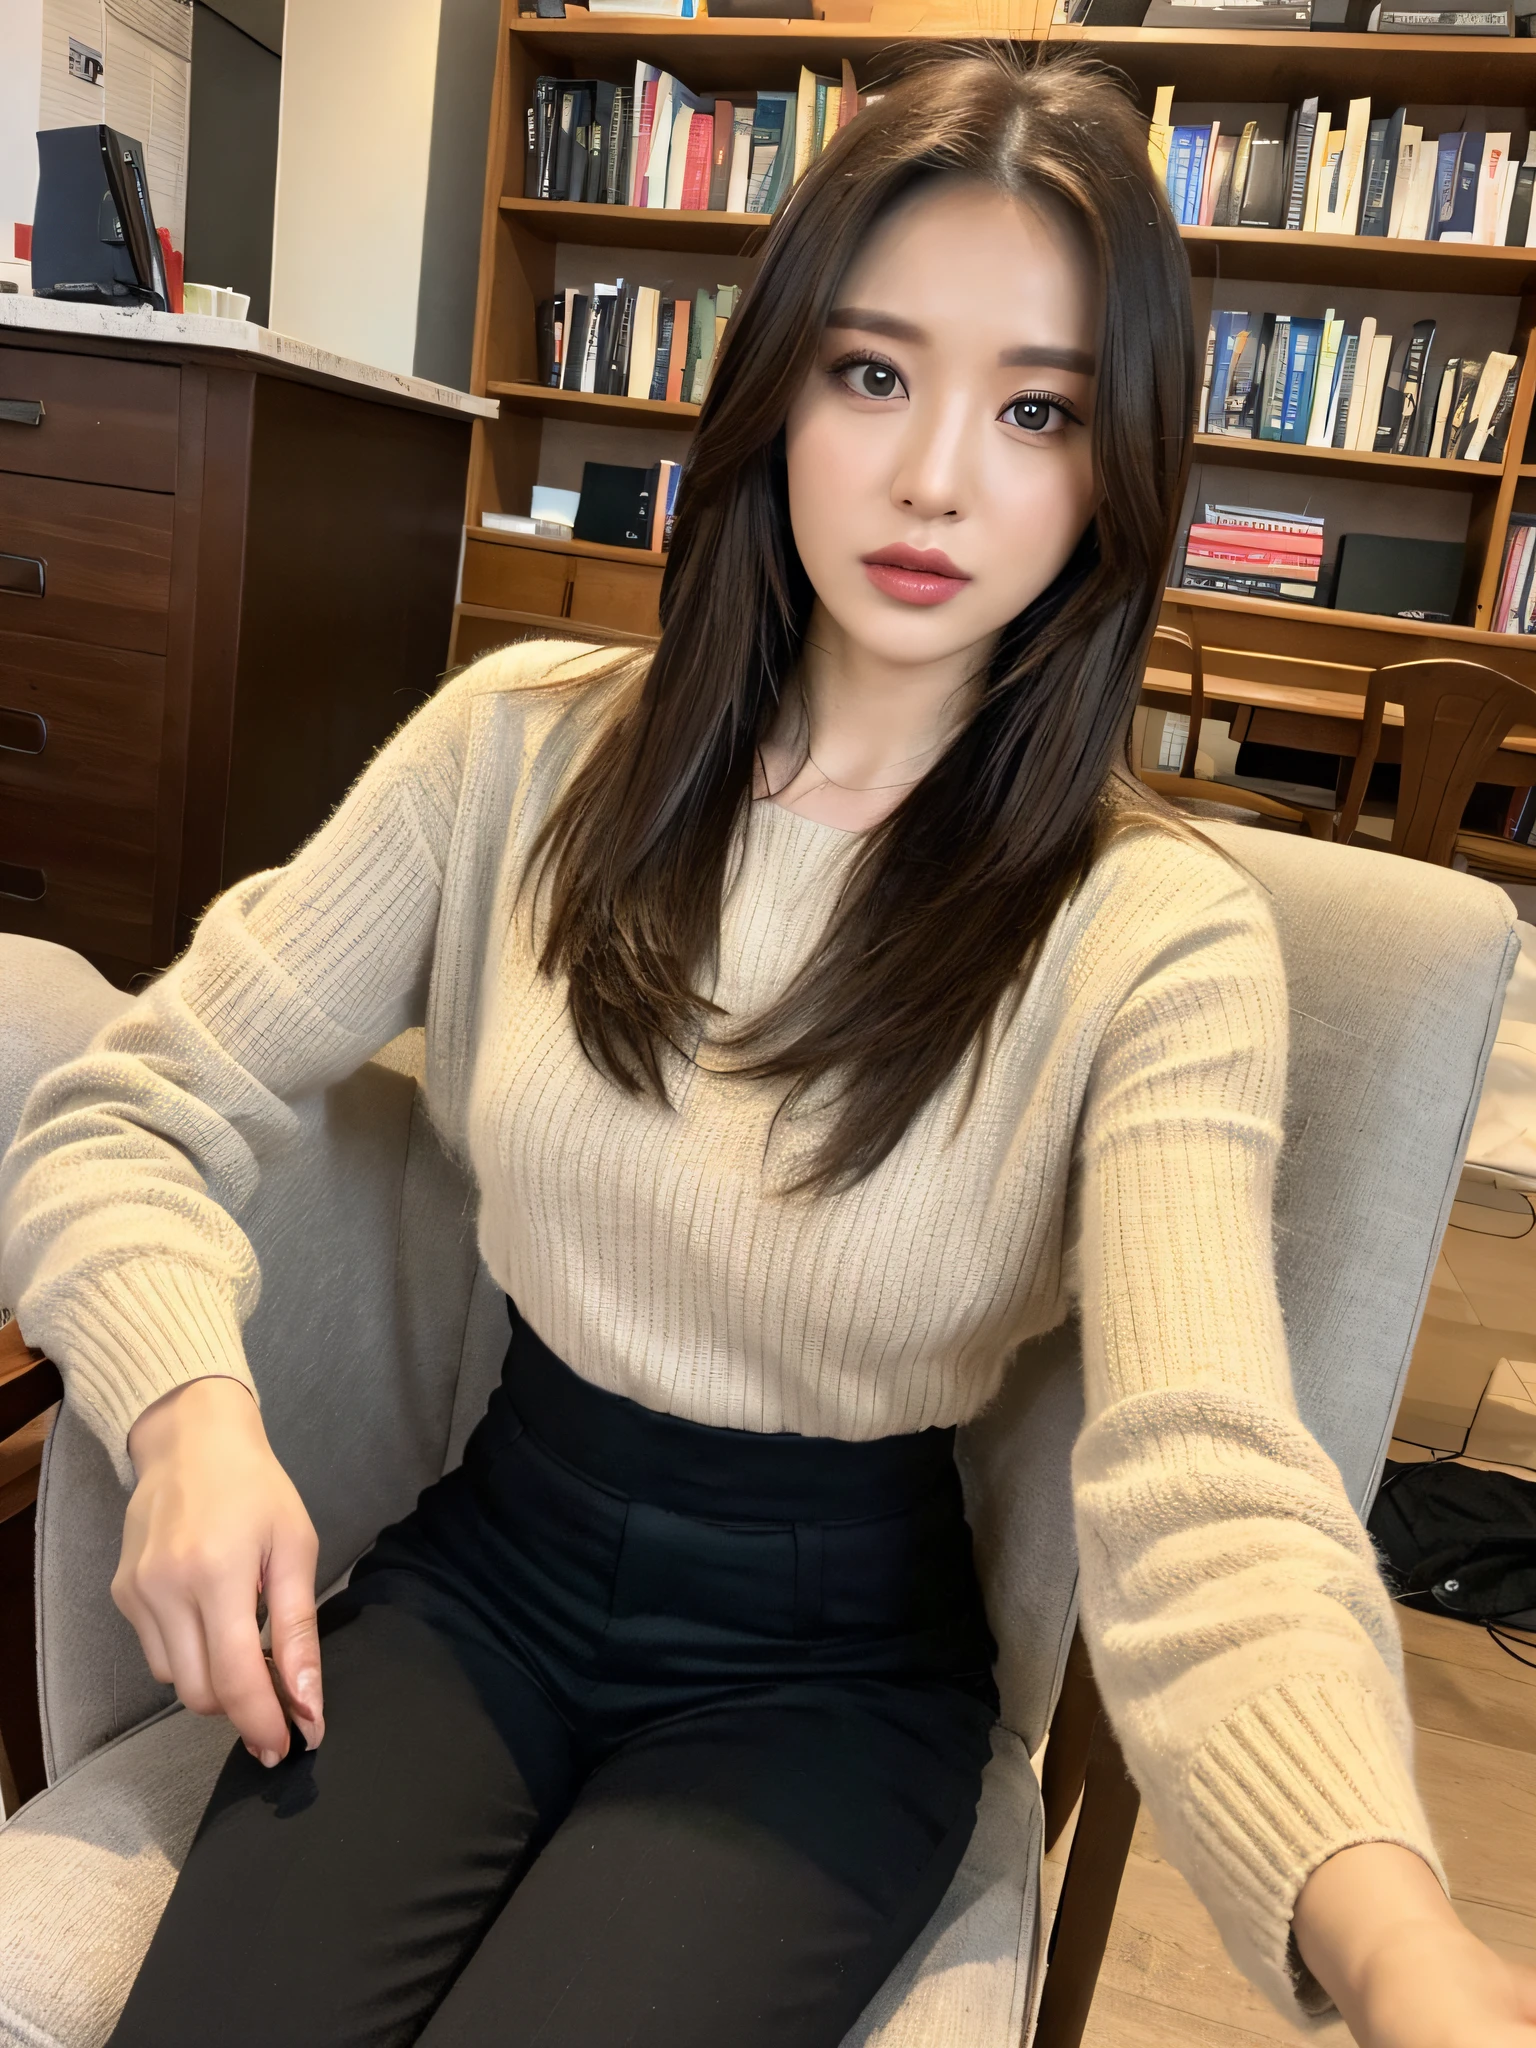 ((cinematiclight, Top quality, 8k, Masterpiece: 1.3)), 1 girl,40 years old slender little hands beautiful woman: 1.3, ( Chinese brunette hair, Small: 1.3), Suit mature : 1.2, , sofas, Super Ultra-detailed face, Detailed eyes serious, Double eyelids, on a chair, Sit upright, ,Feminine beauty, Serious face bookshelf book trousers